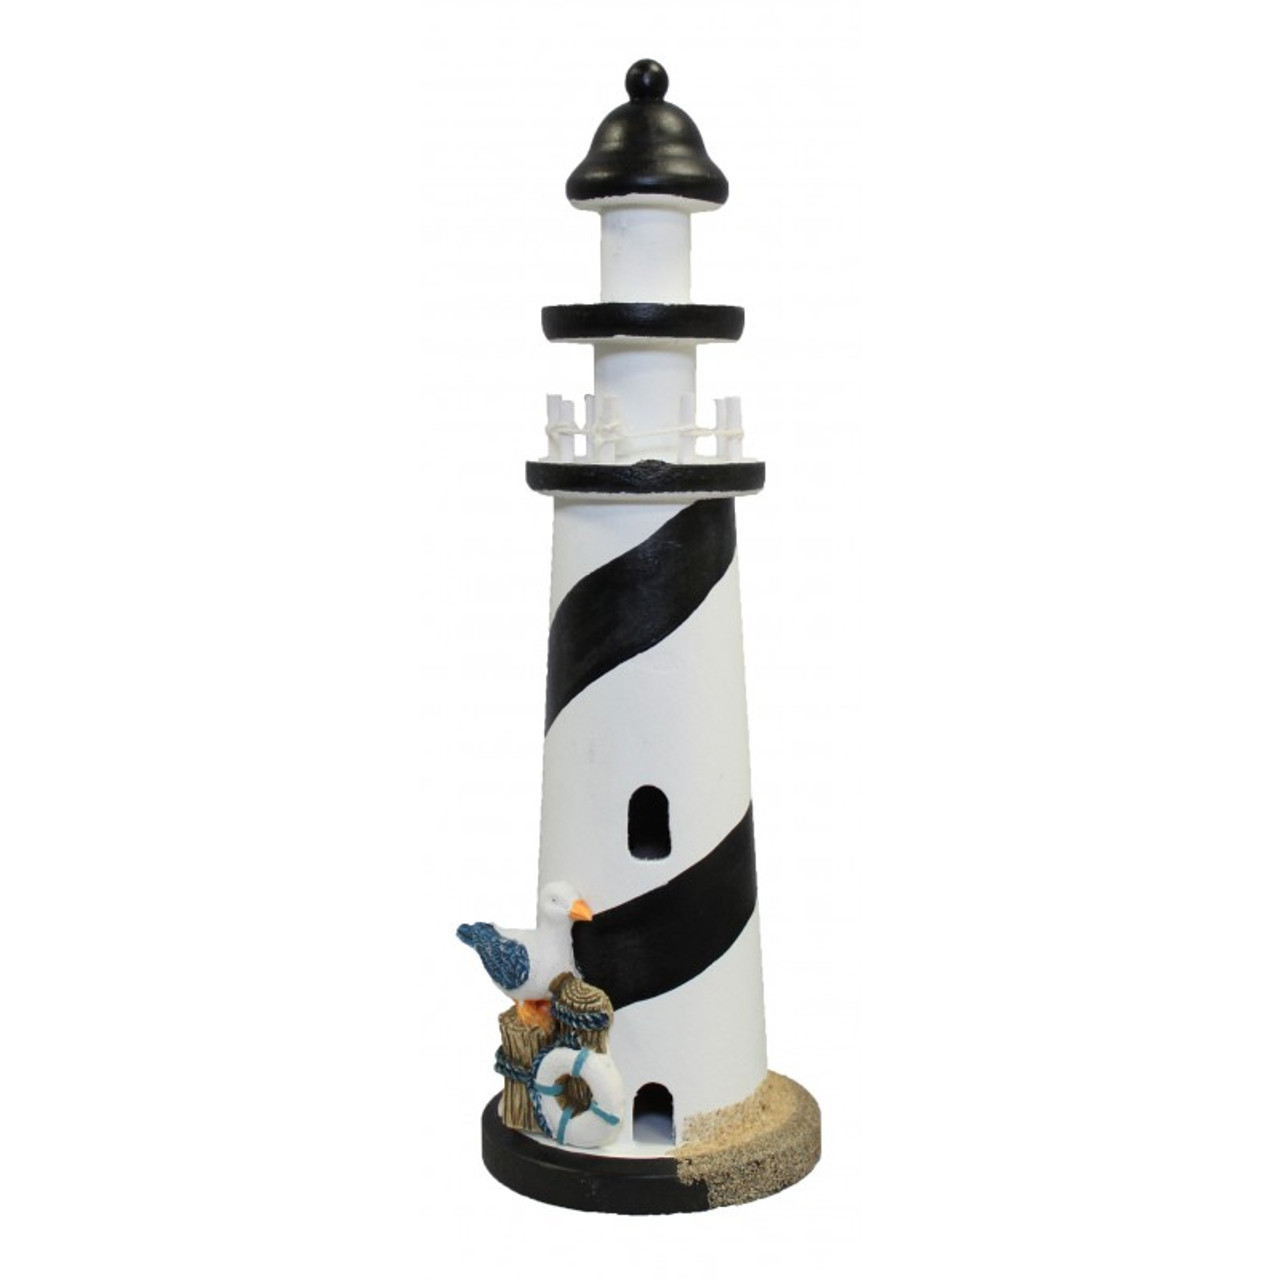 Wooden Lighthouse with Bird - 10"